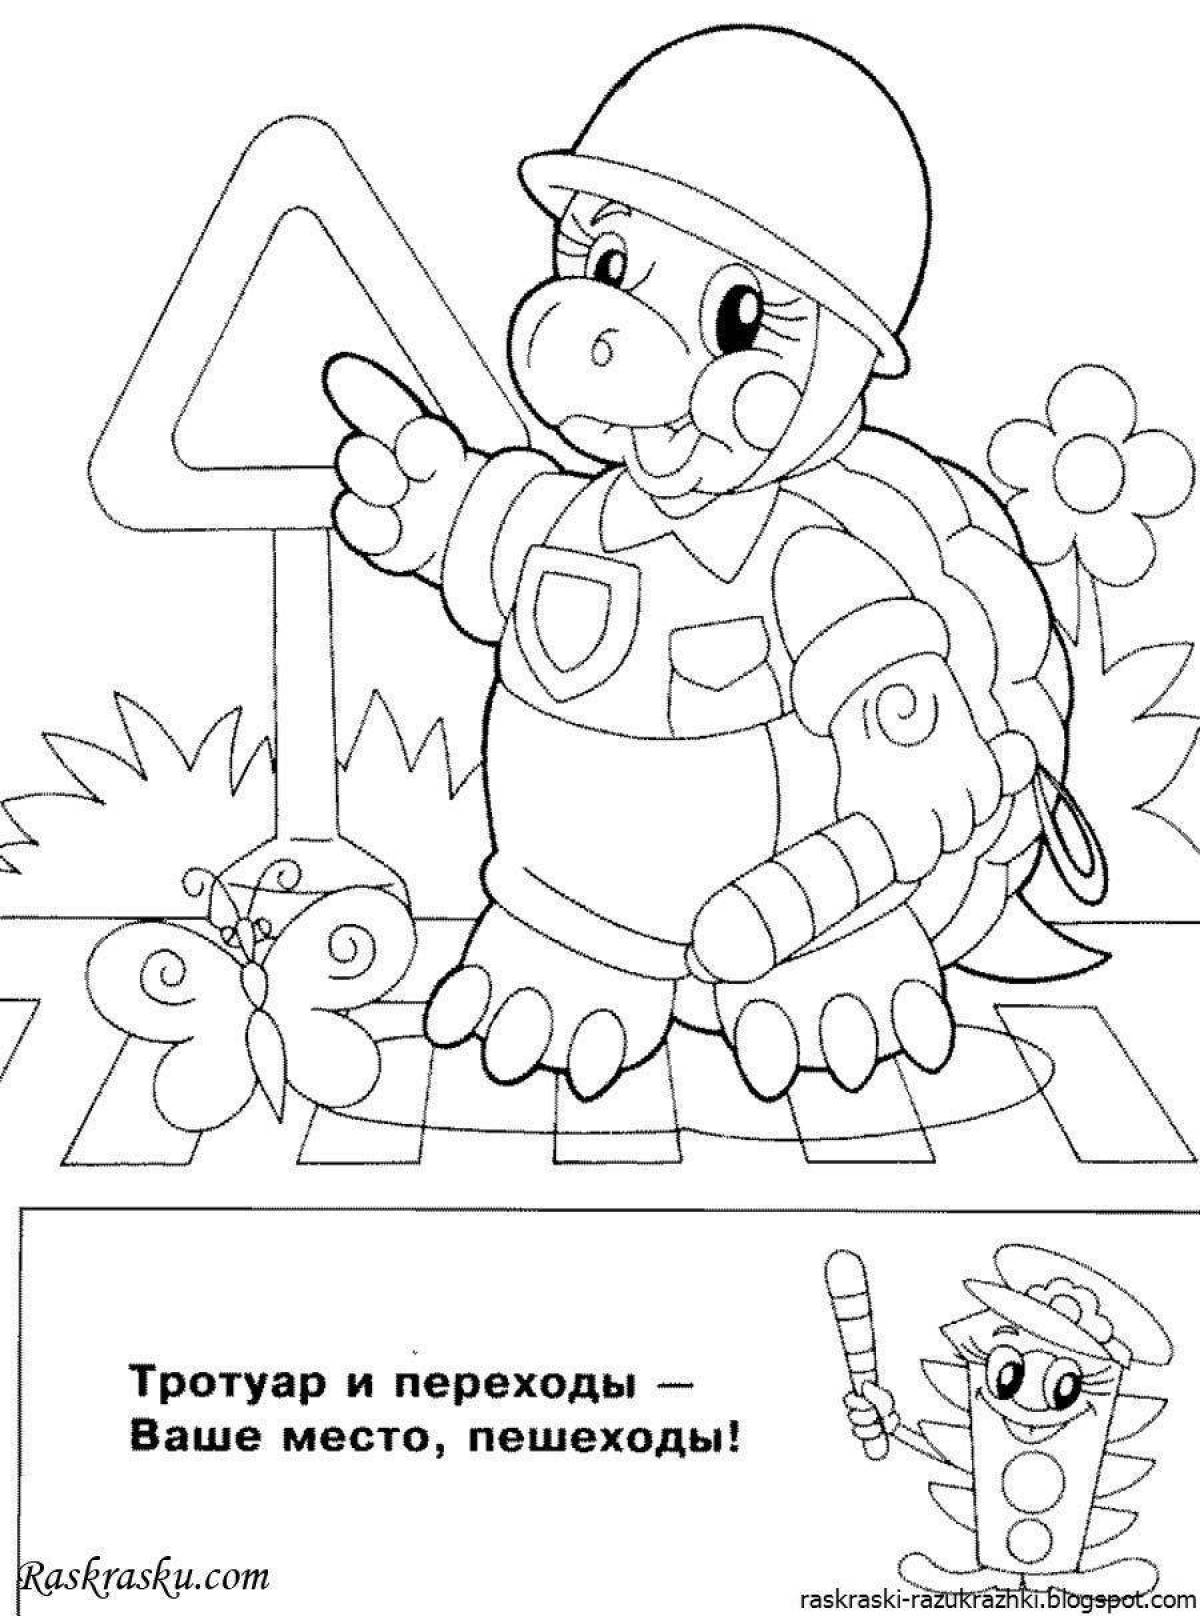 Fun coloring book for traffic safety